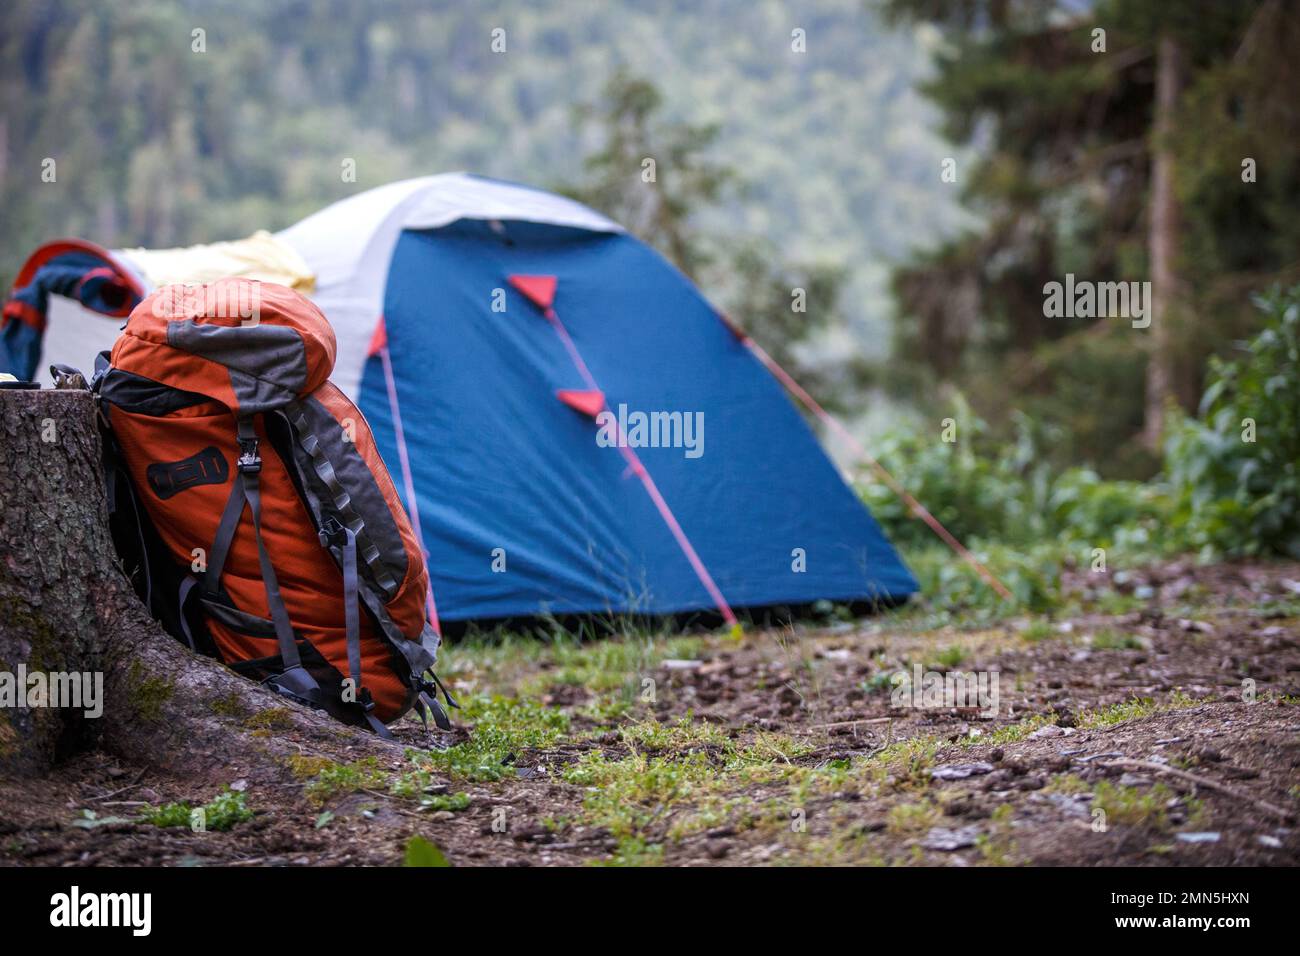 Camping Gear for the Active Camping Family